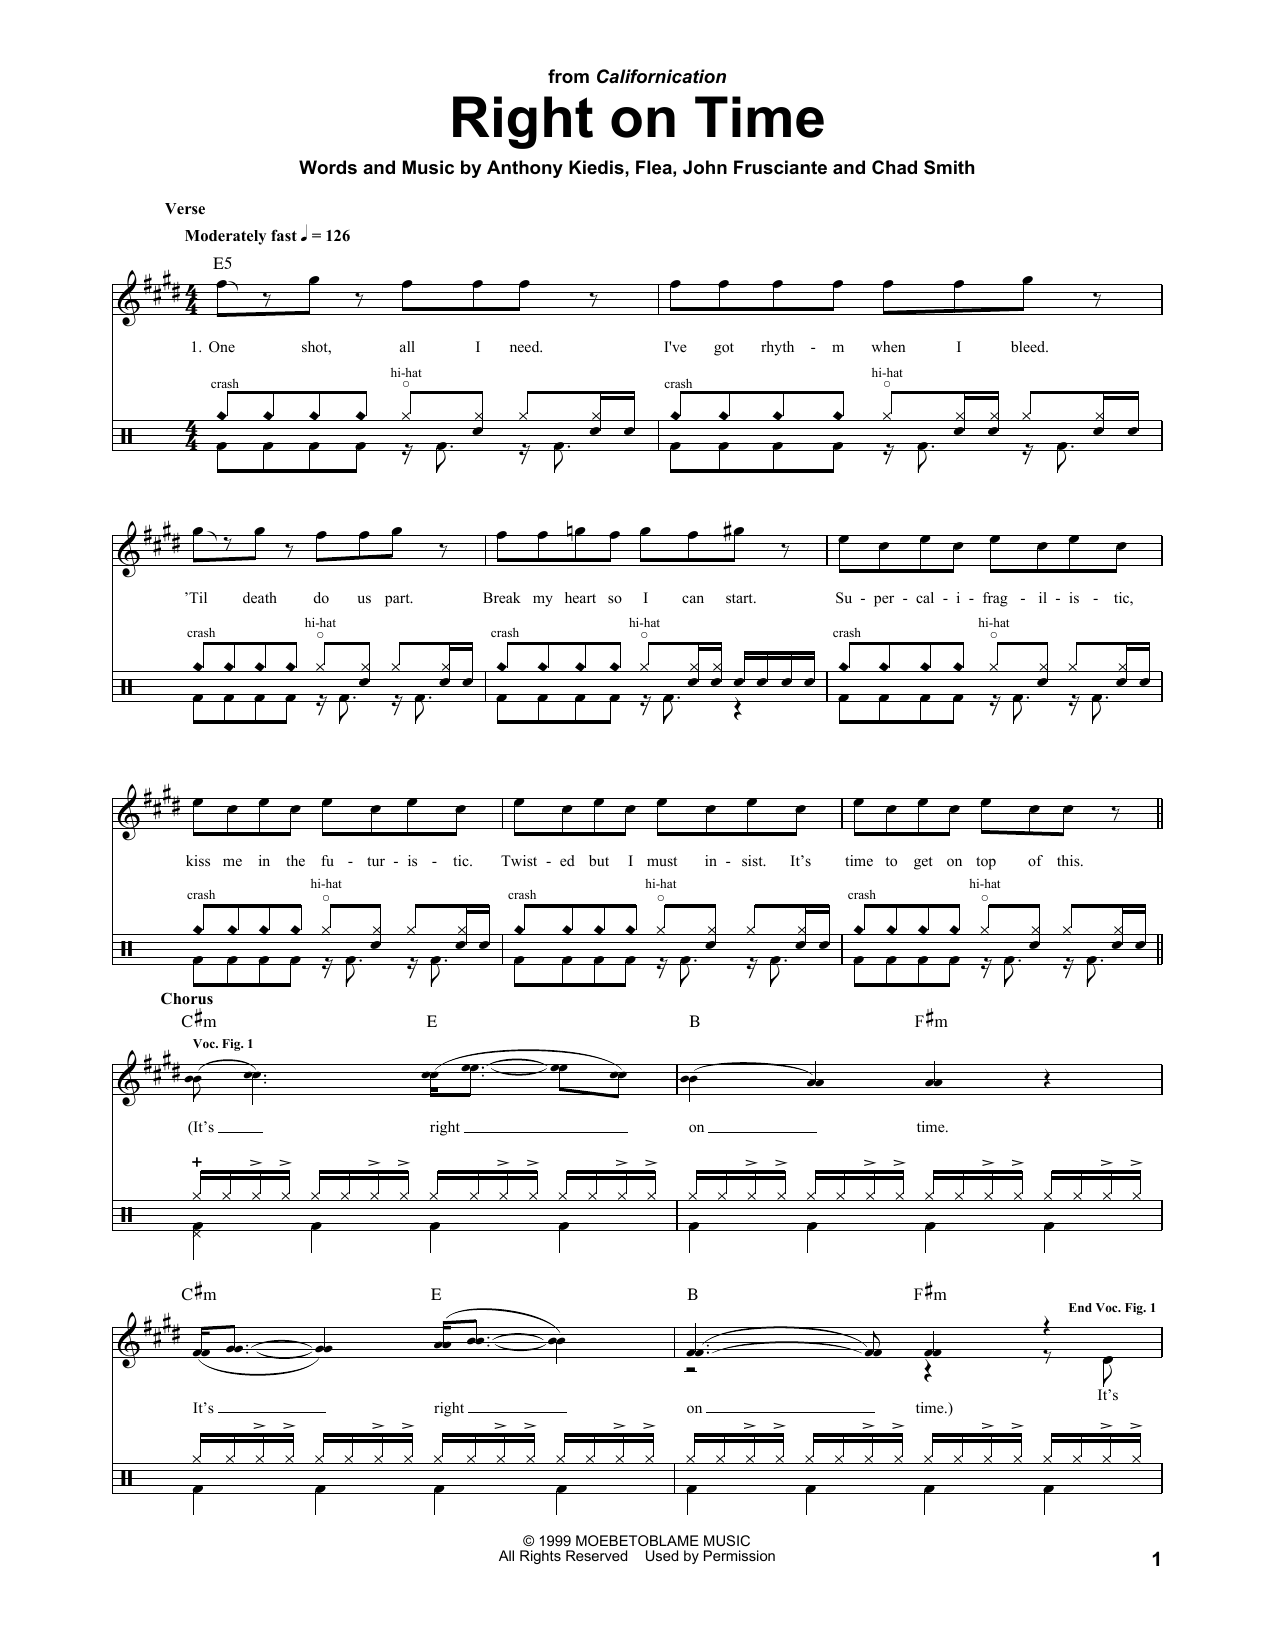 Download Red Hot Chili Peppers Right On Time Sheet Music